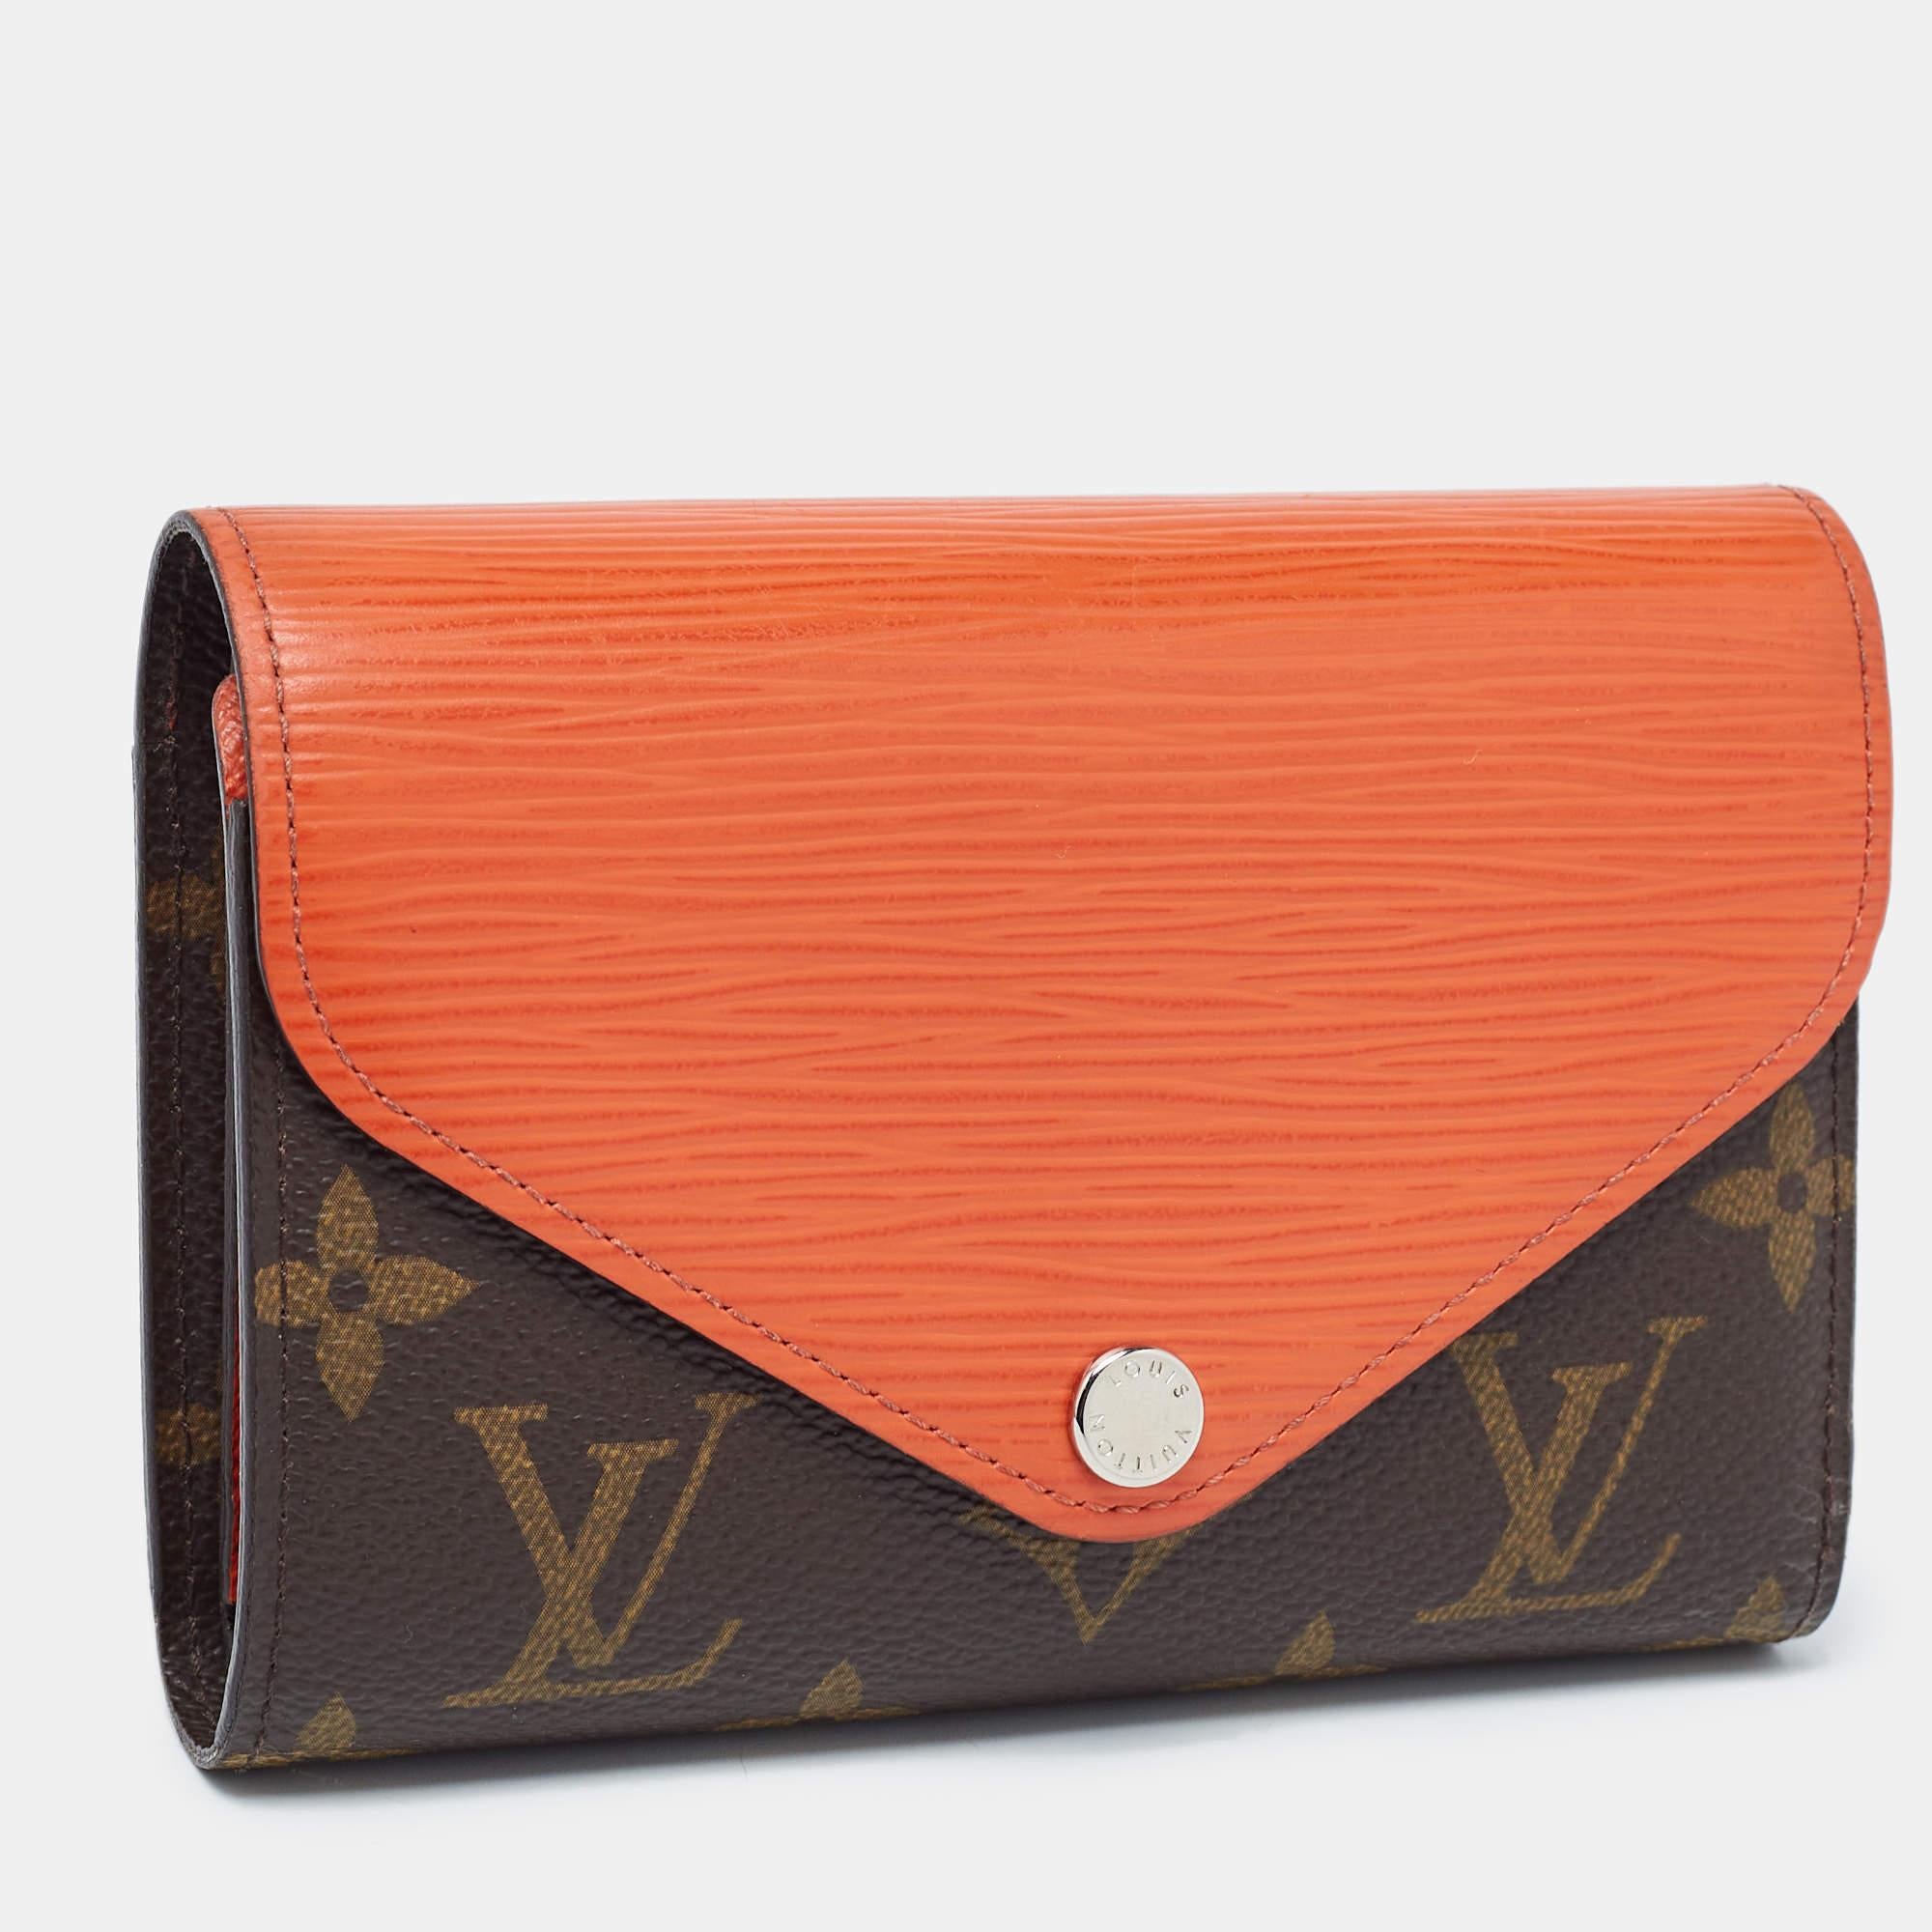 This classy Louis Vuitton wallet brings along a touch of luxury and immense style. It comes perfectly crafted to neatly carry your cards and cash.

